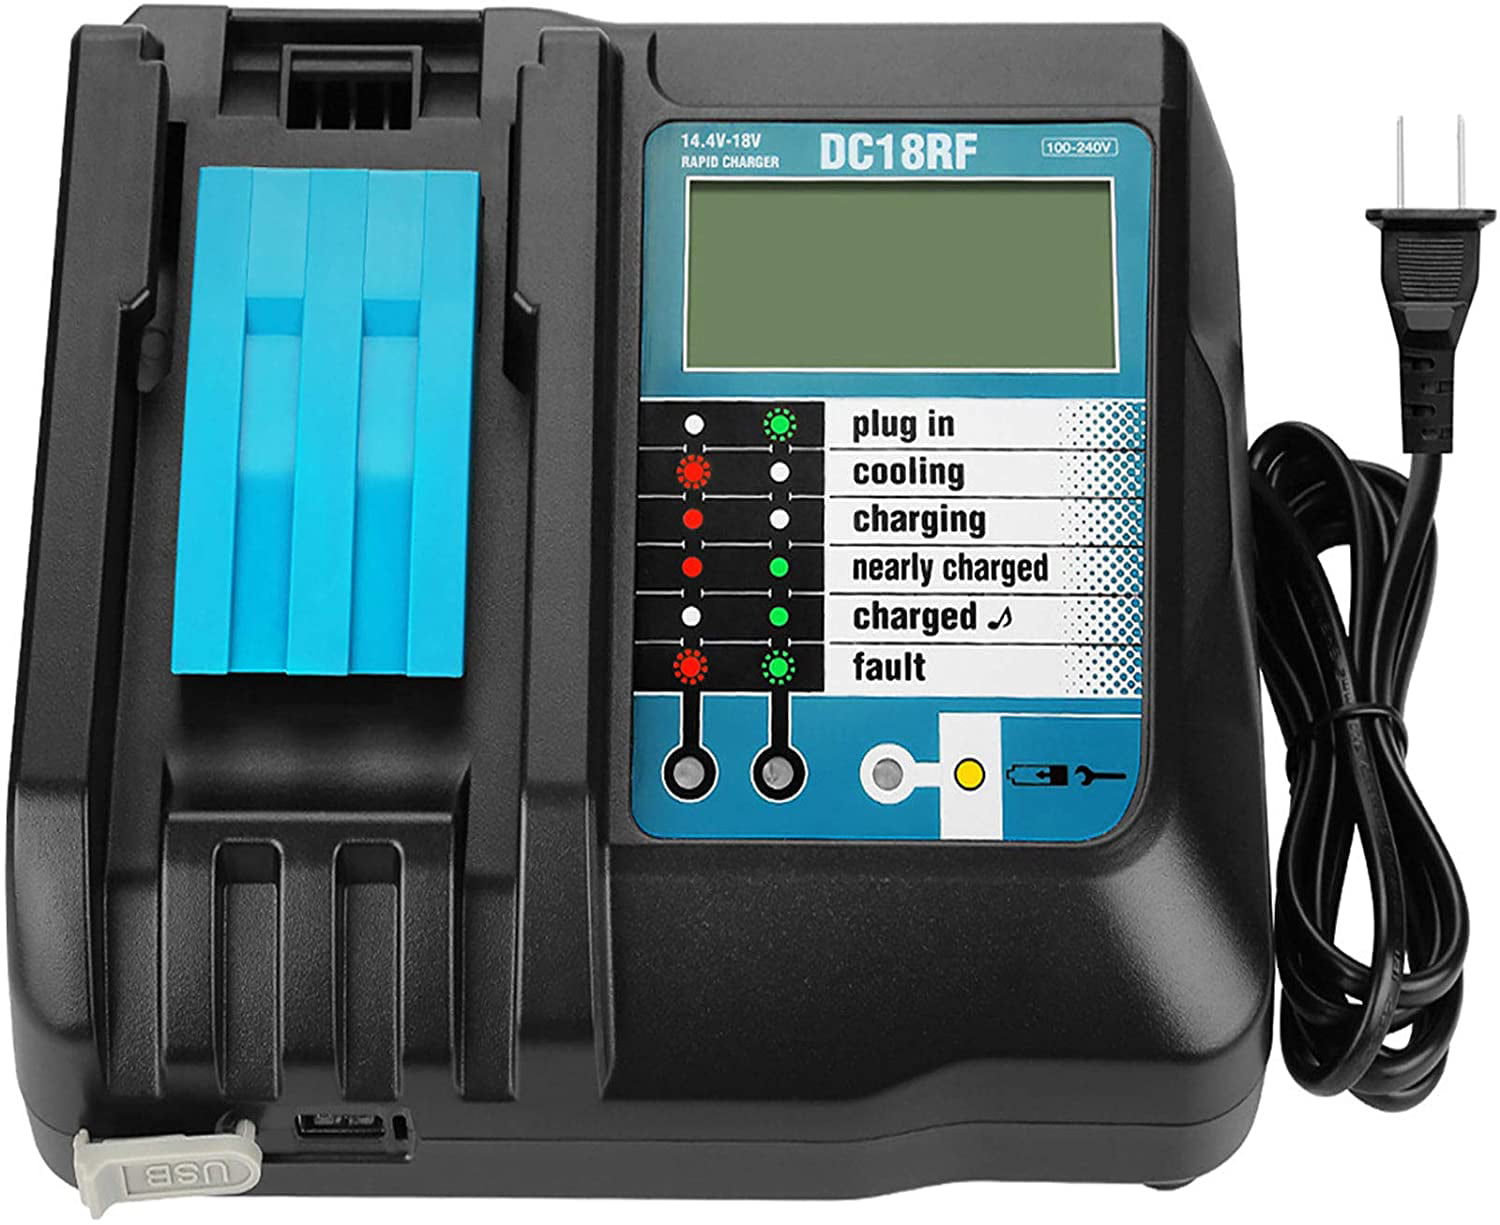 Battery Charger for MAKITA DC18RC BL1815 BL1830 BL1840 BL1845 BL1860 BL1415